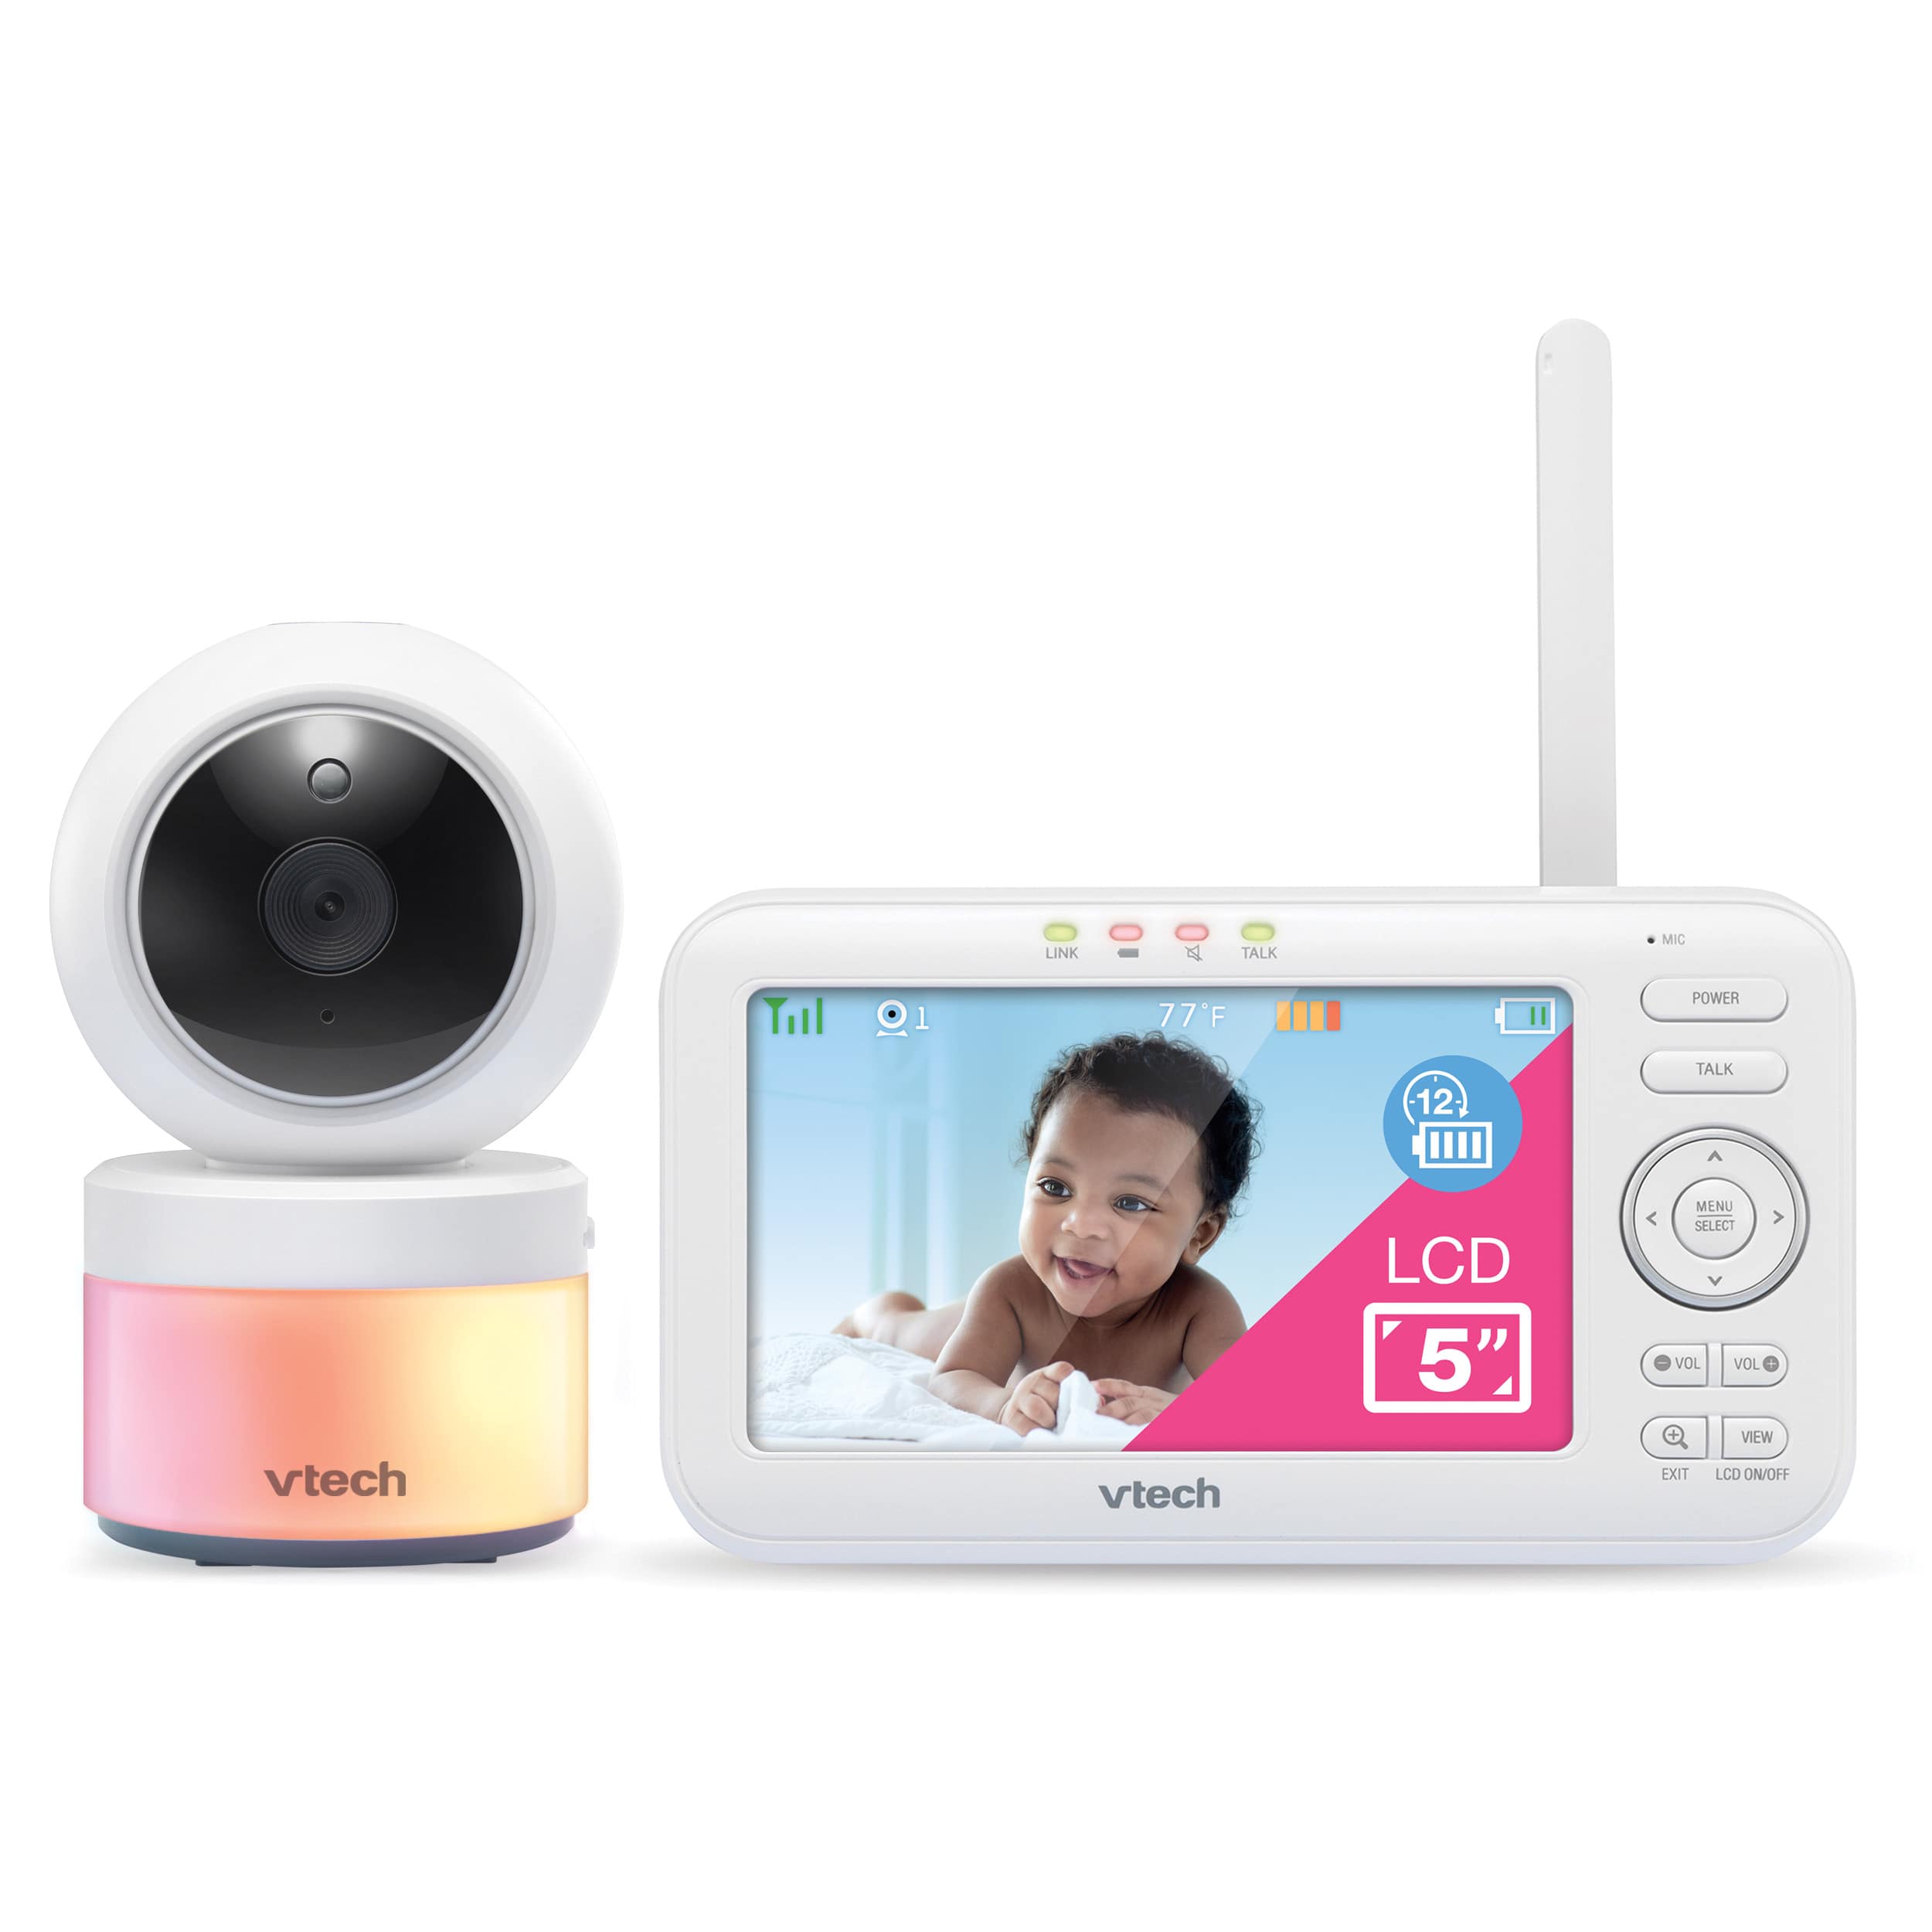 Why is My Vtech Baby Monitor Not Connecting to the Camera